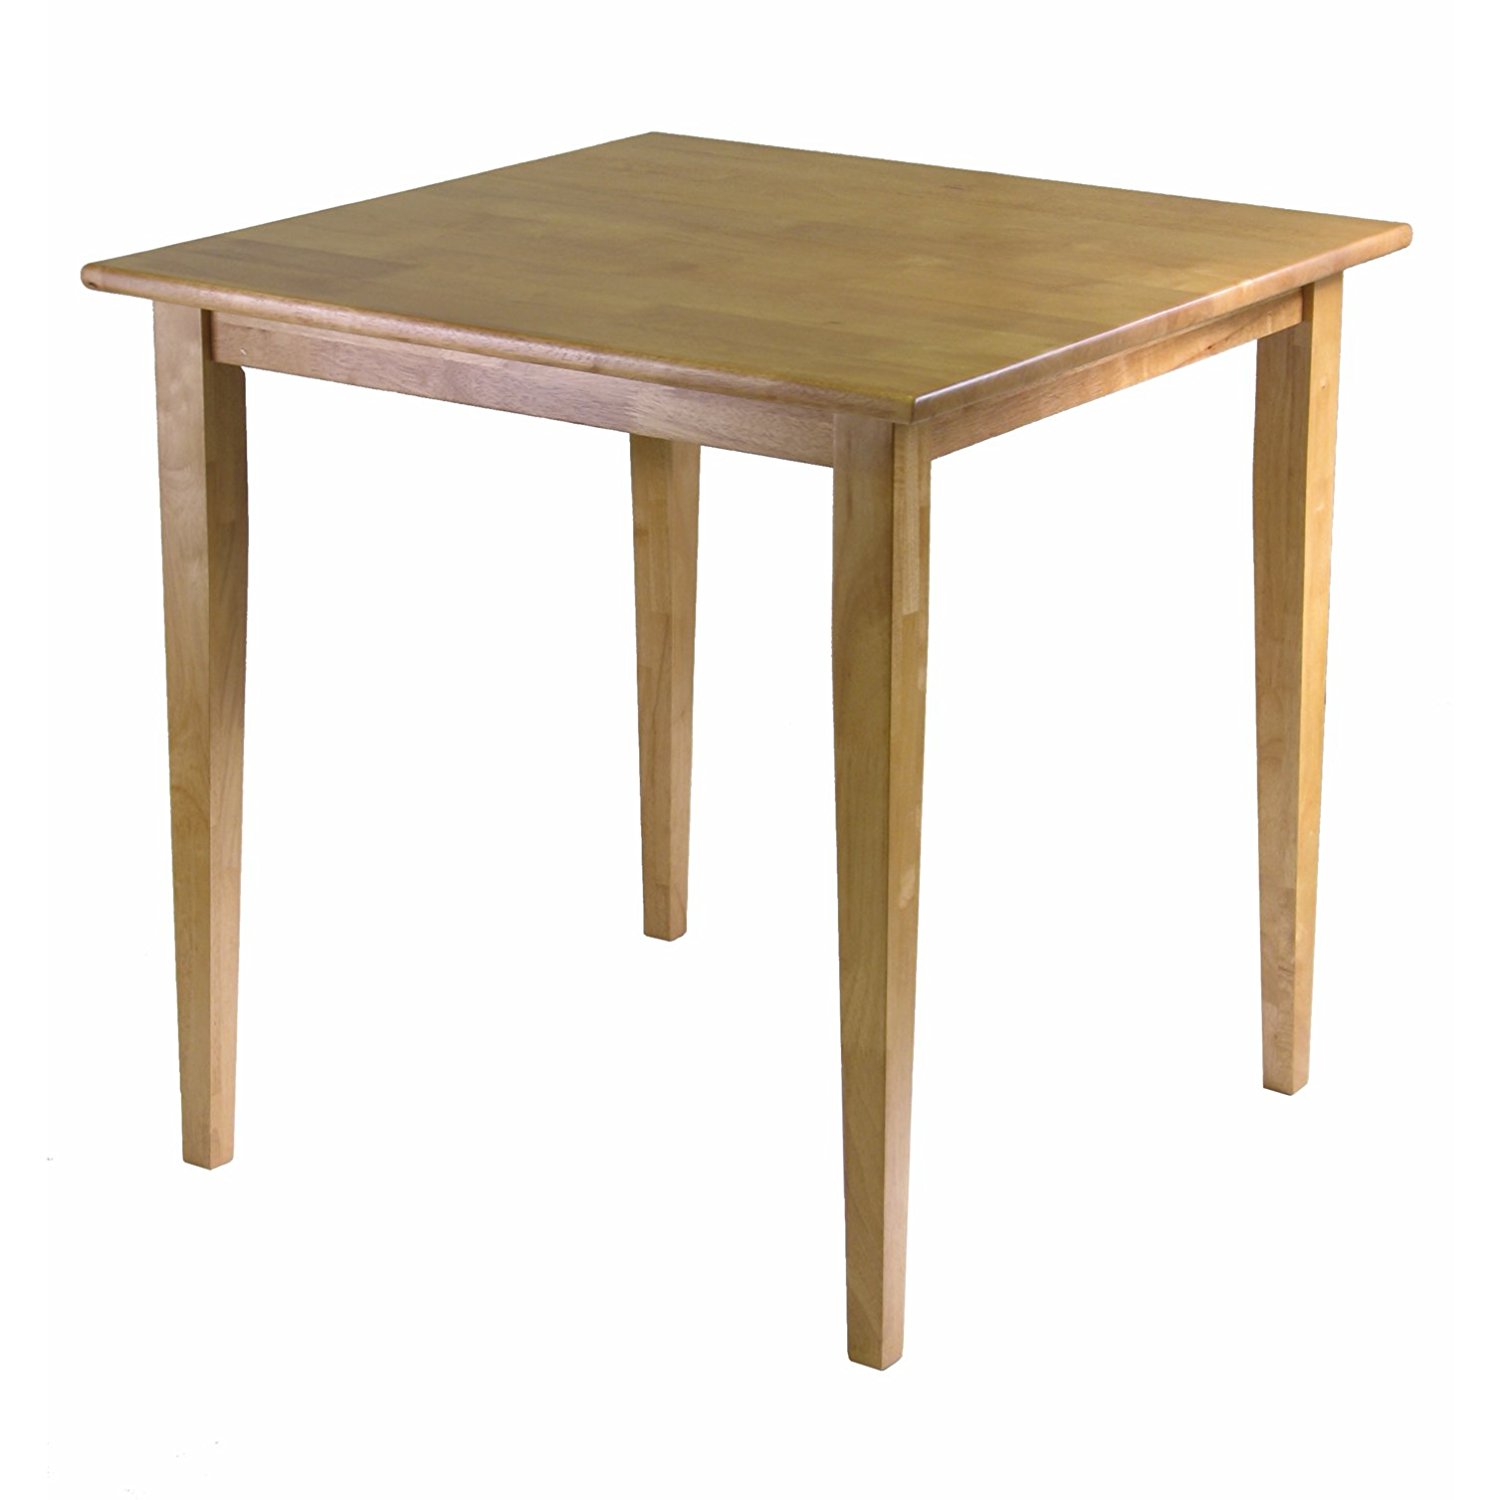 Winsome Wood Groveland Square Dining Table with Shaker legs, Light Oak Finish